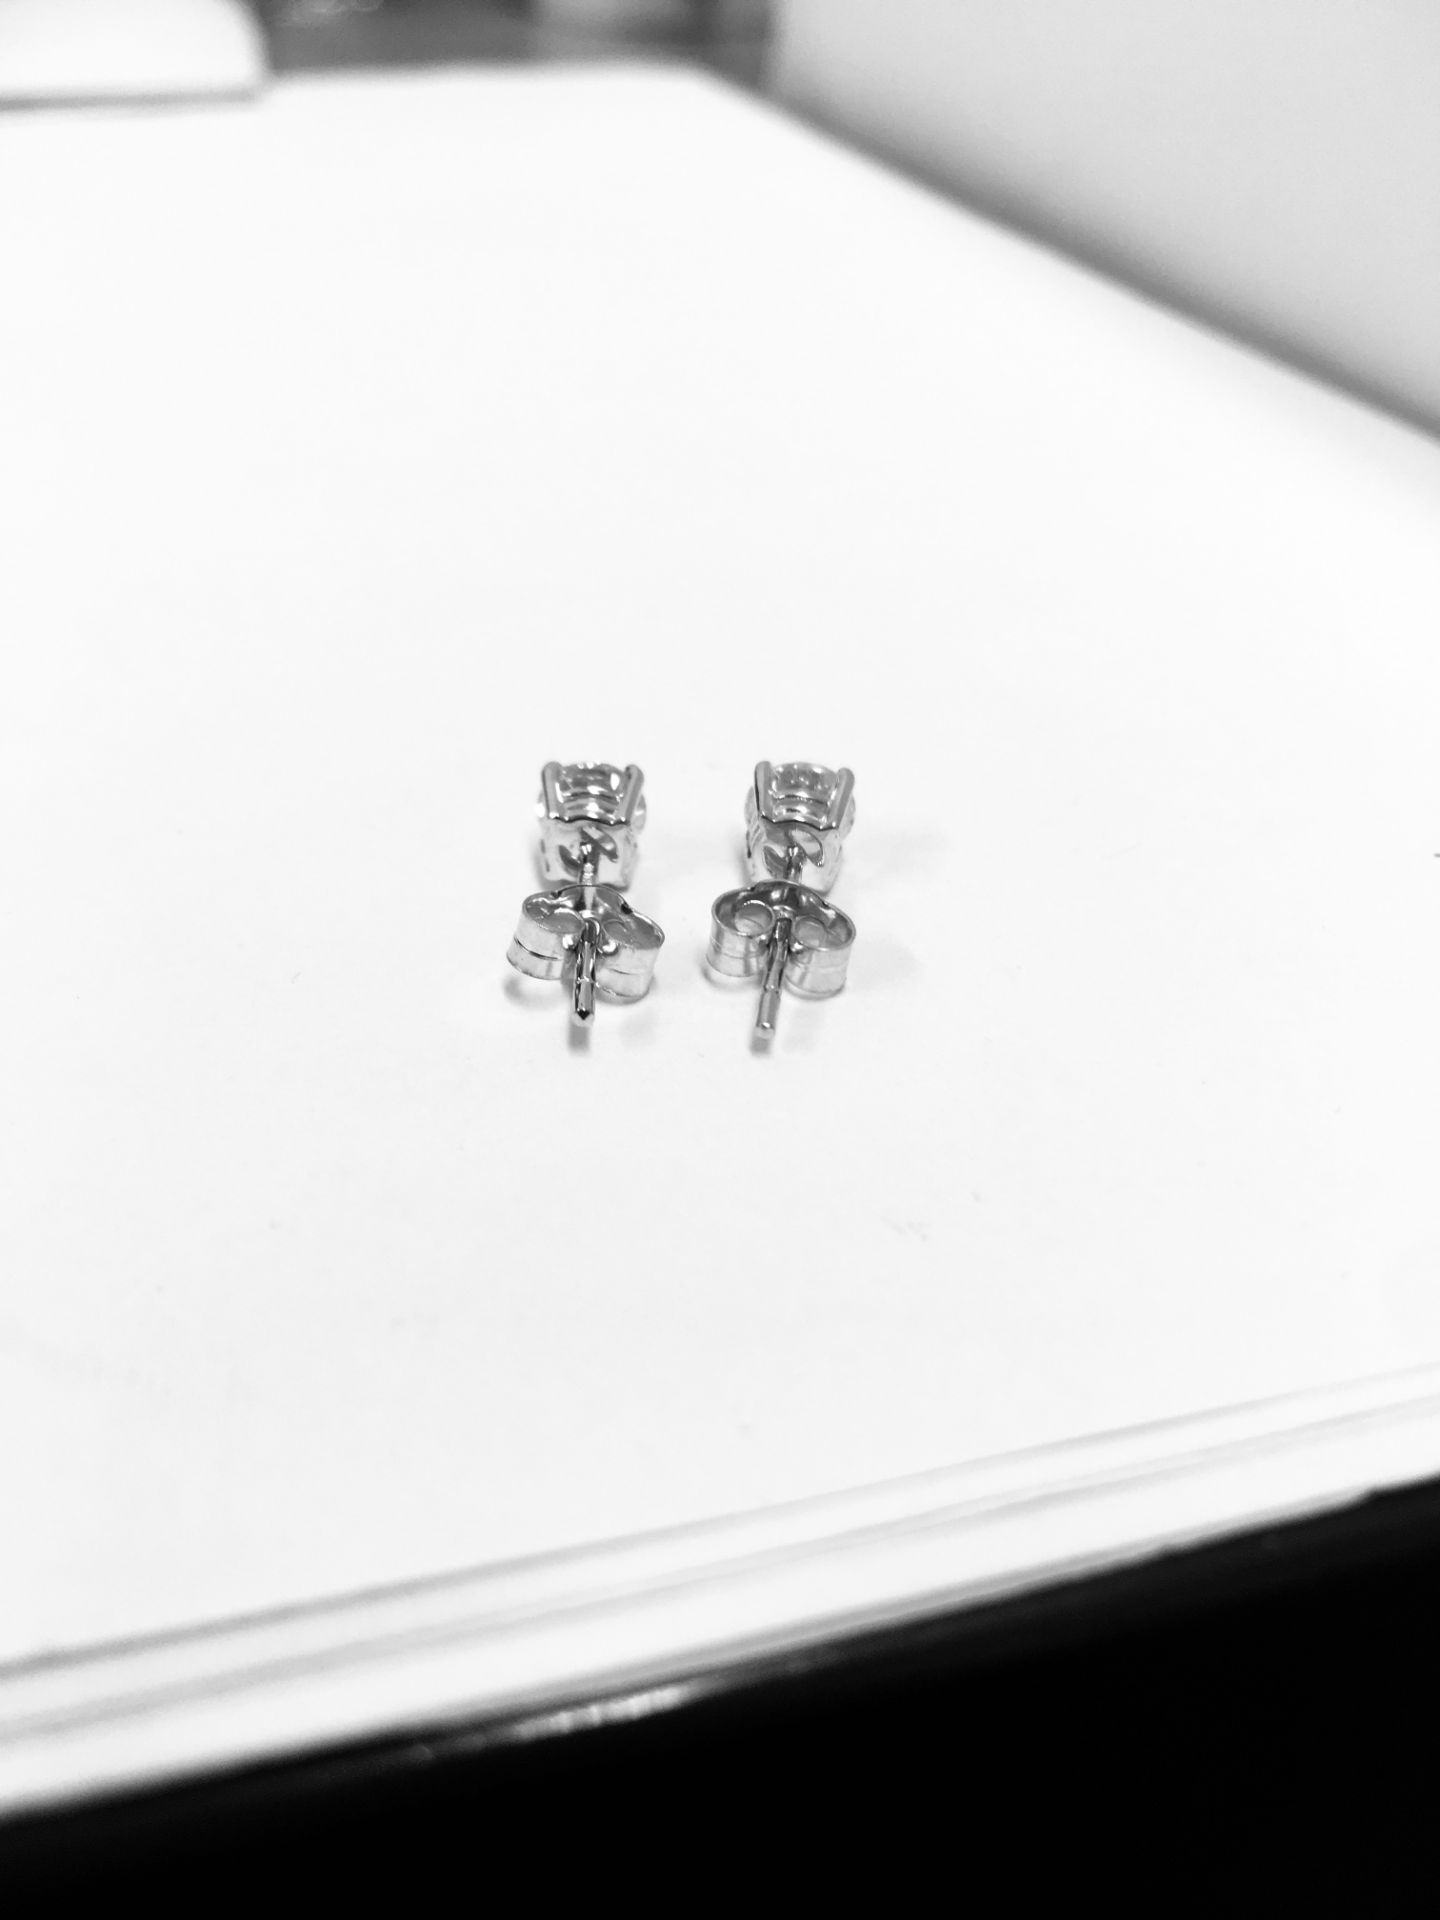 1ct diamond soliataire earrings2x0.50ct h colour vs grade diamonds ,18ct white gold 2gms uk made - Image 3 of 4